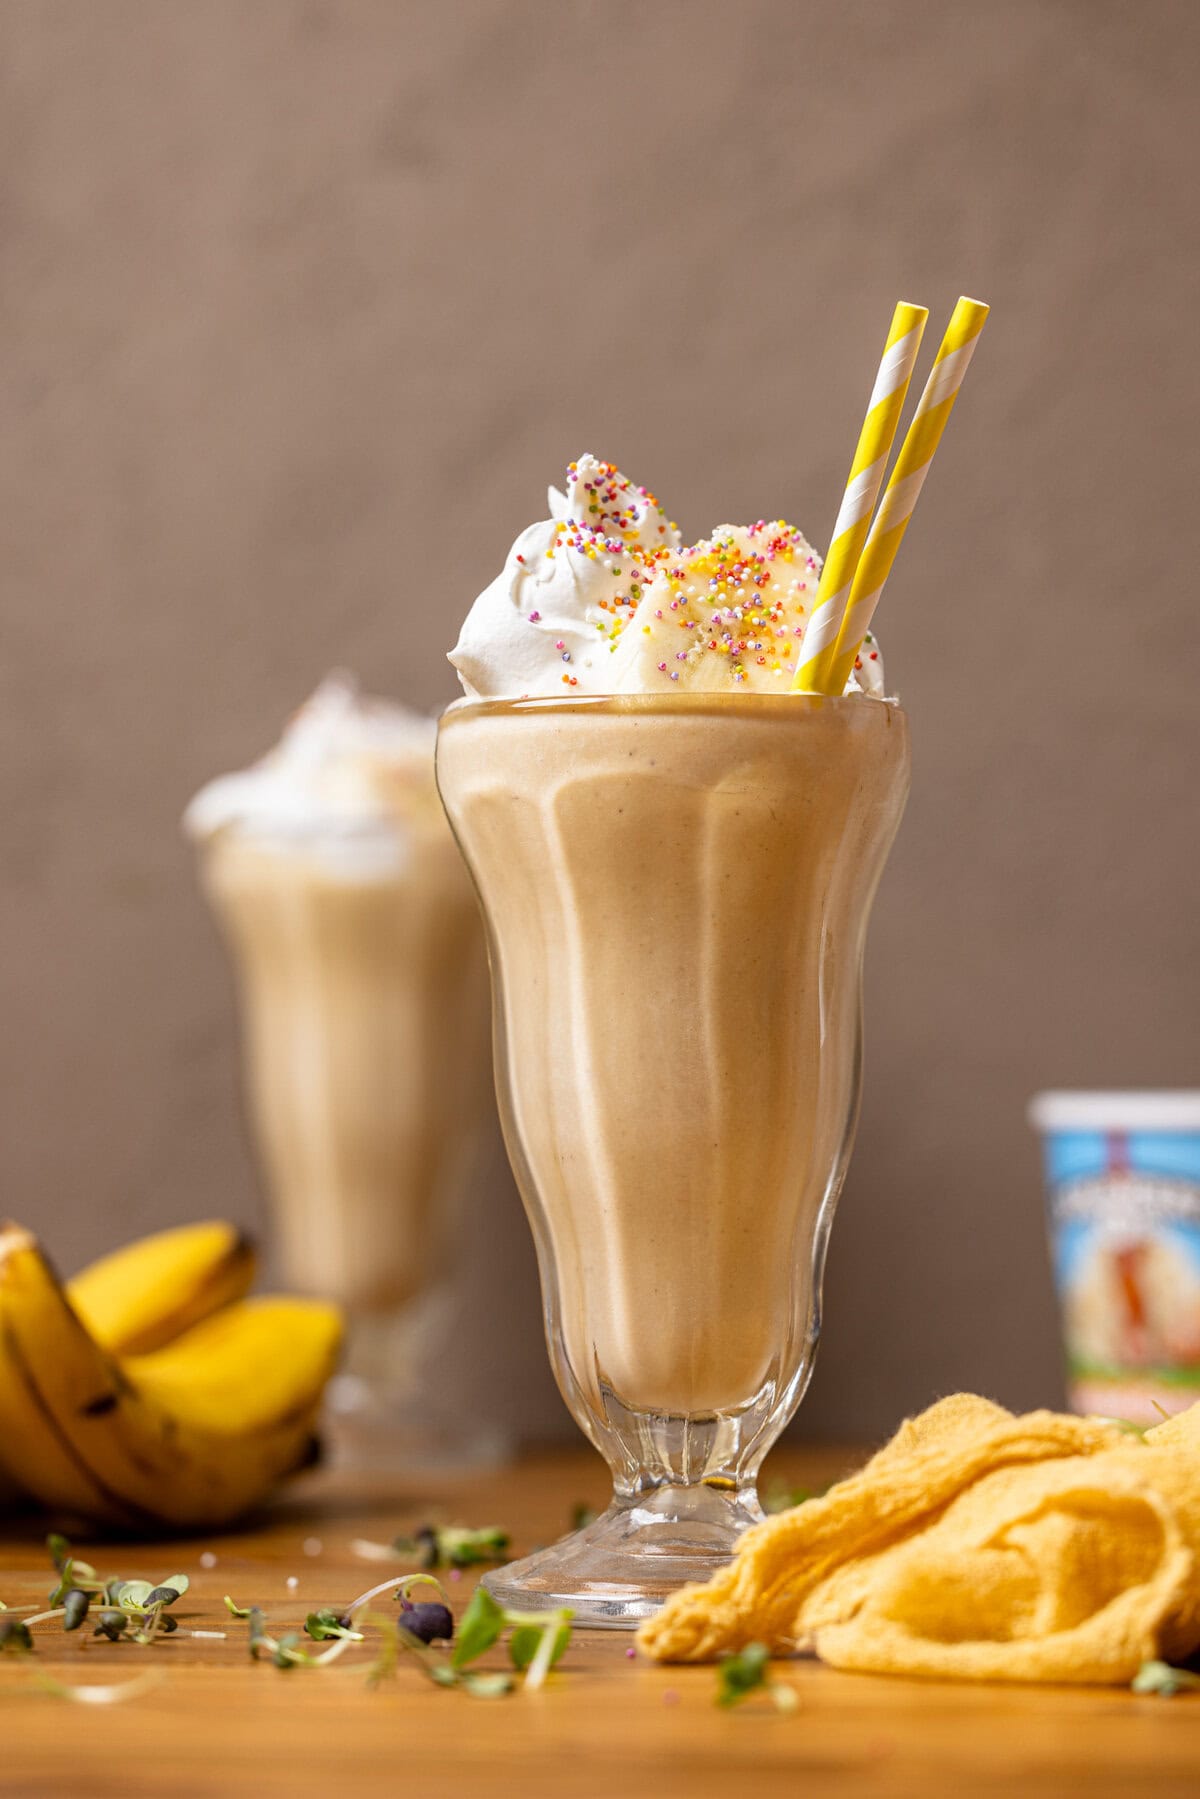 Two glasses of milkshake with yellow strip straws, bananas, and a pint of ice cream in the background. 